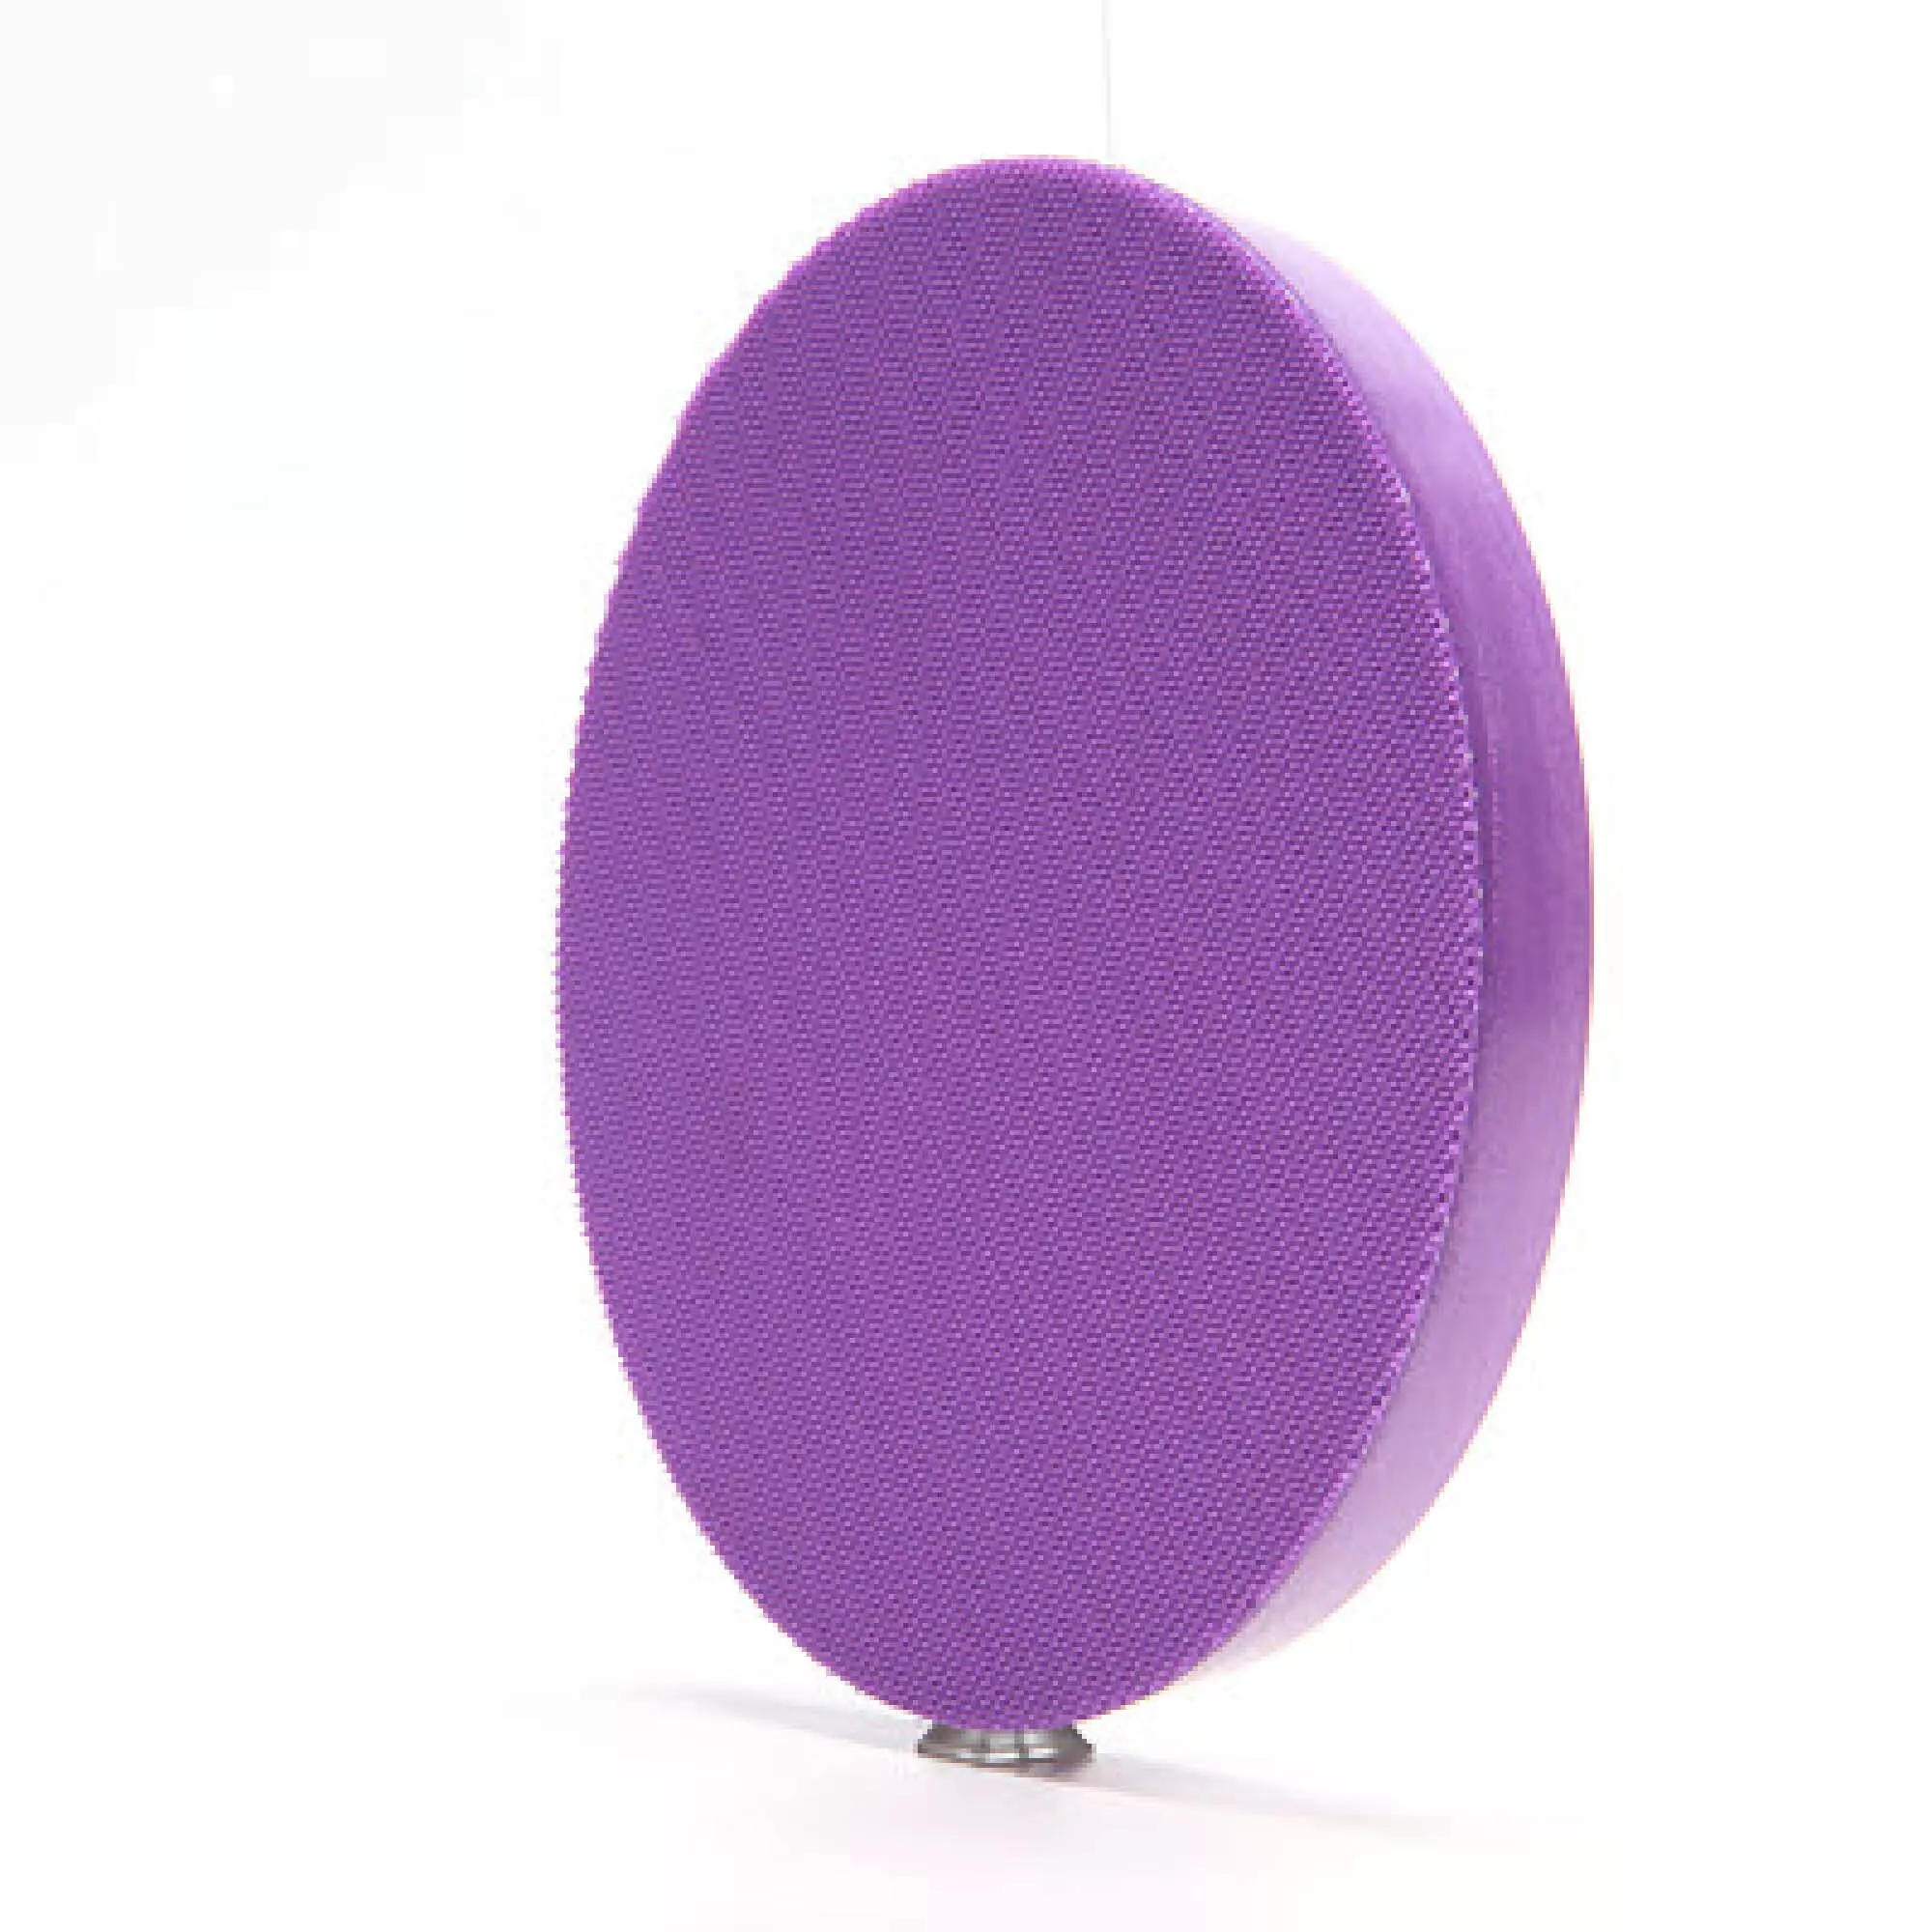 SKU 7000119757 | 3M™ Painter's Disc Pad with Hookit™